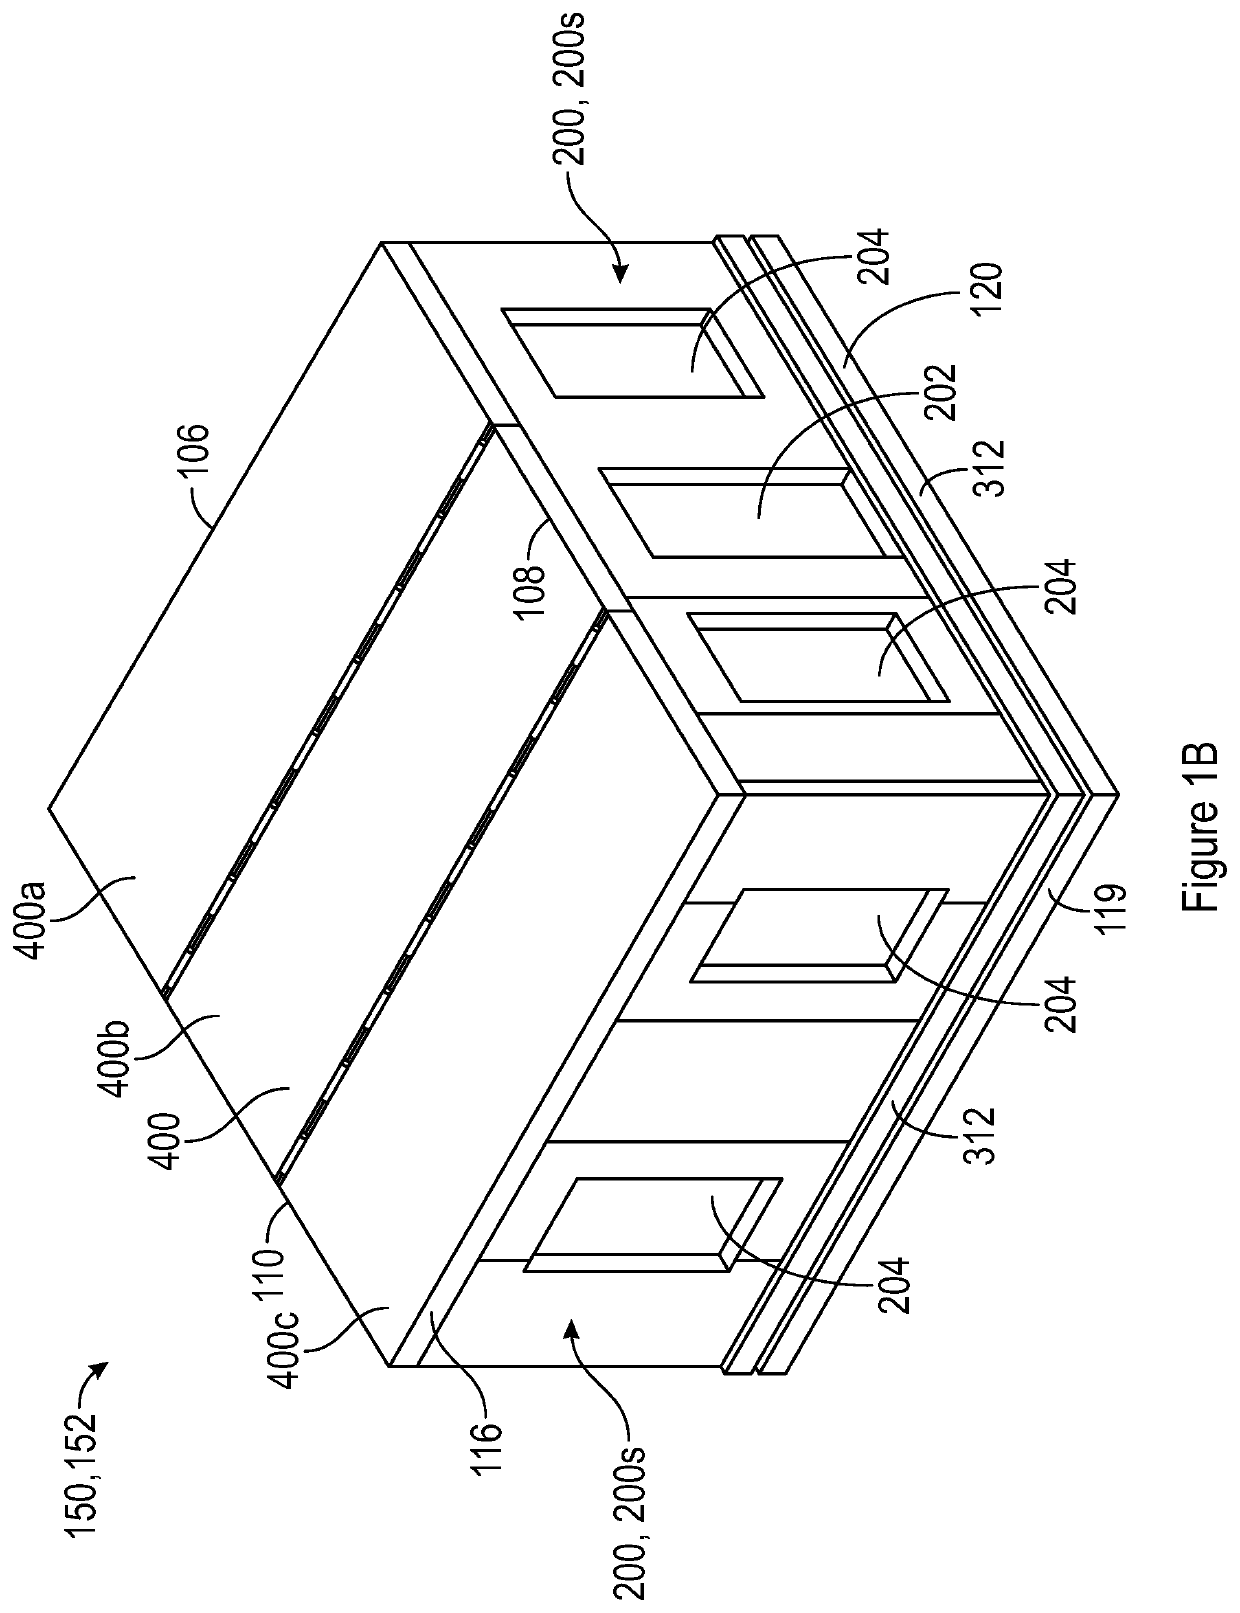 Equipment and Methods for Erecting a Transportable Foldable Building Structure